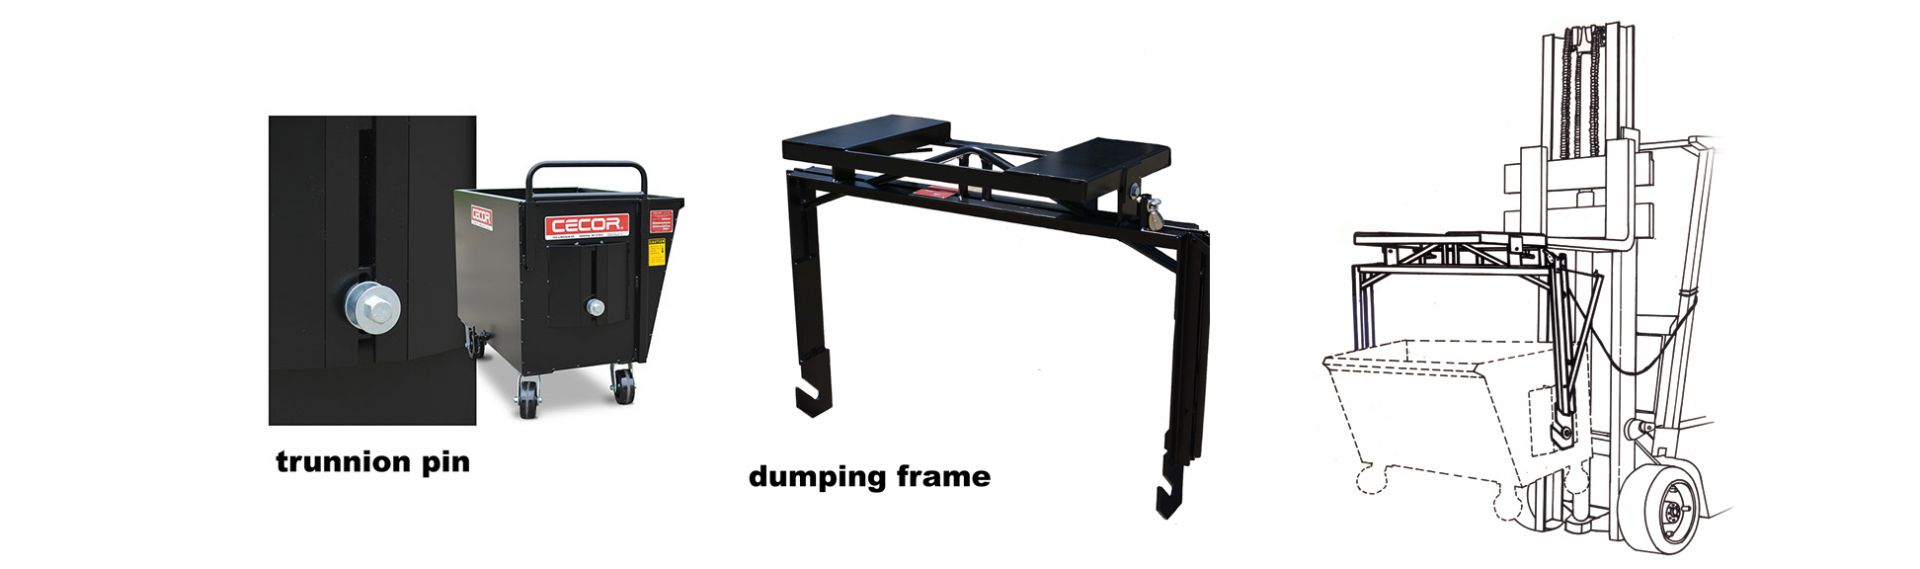 dumping carts with optional frame